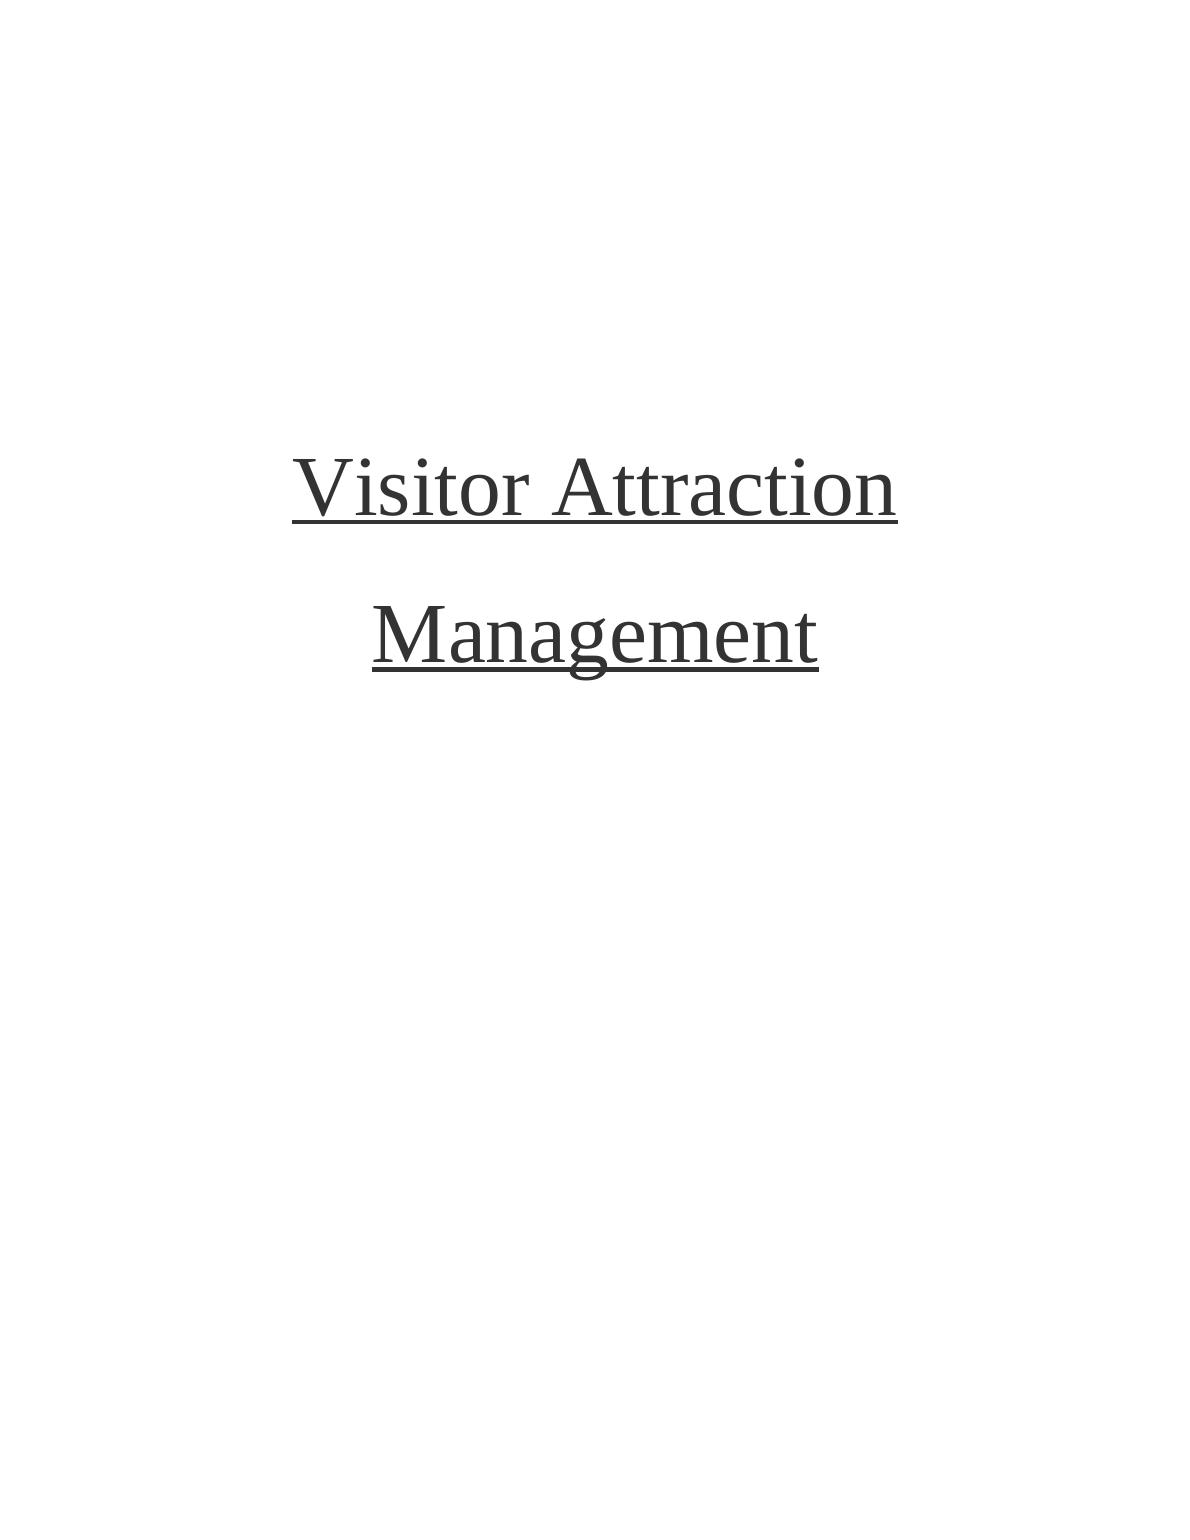 Visitor Attraction Management - doc_1